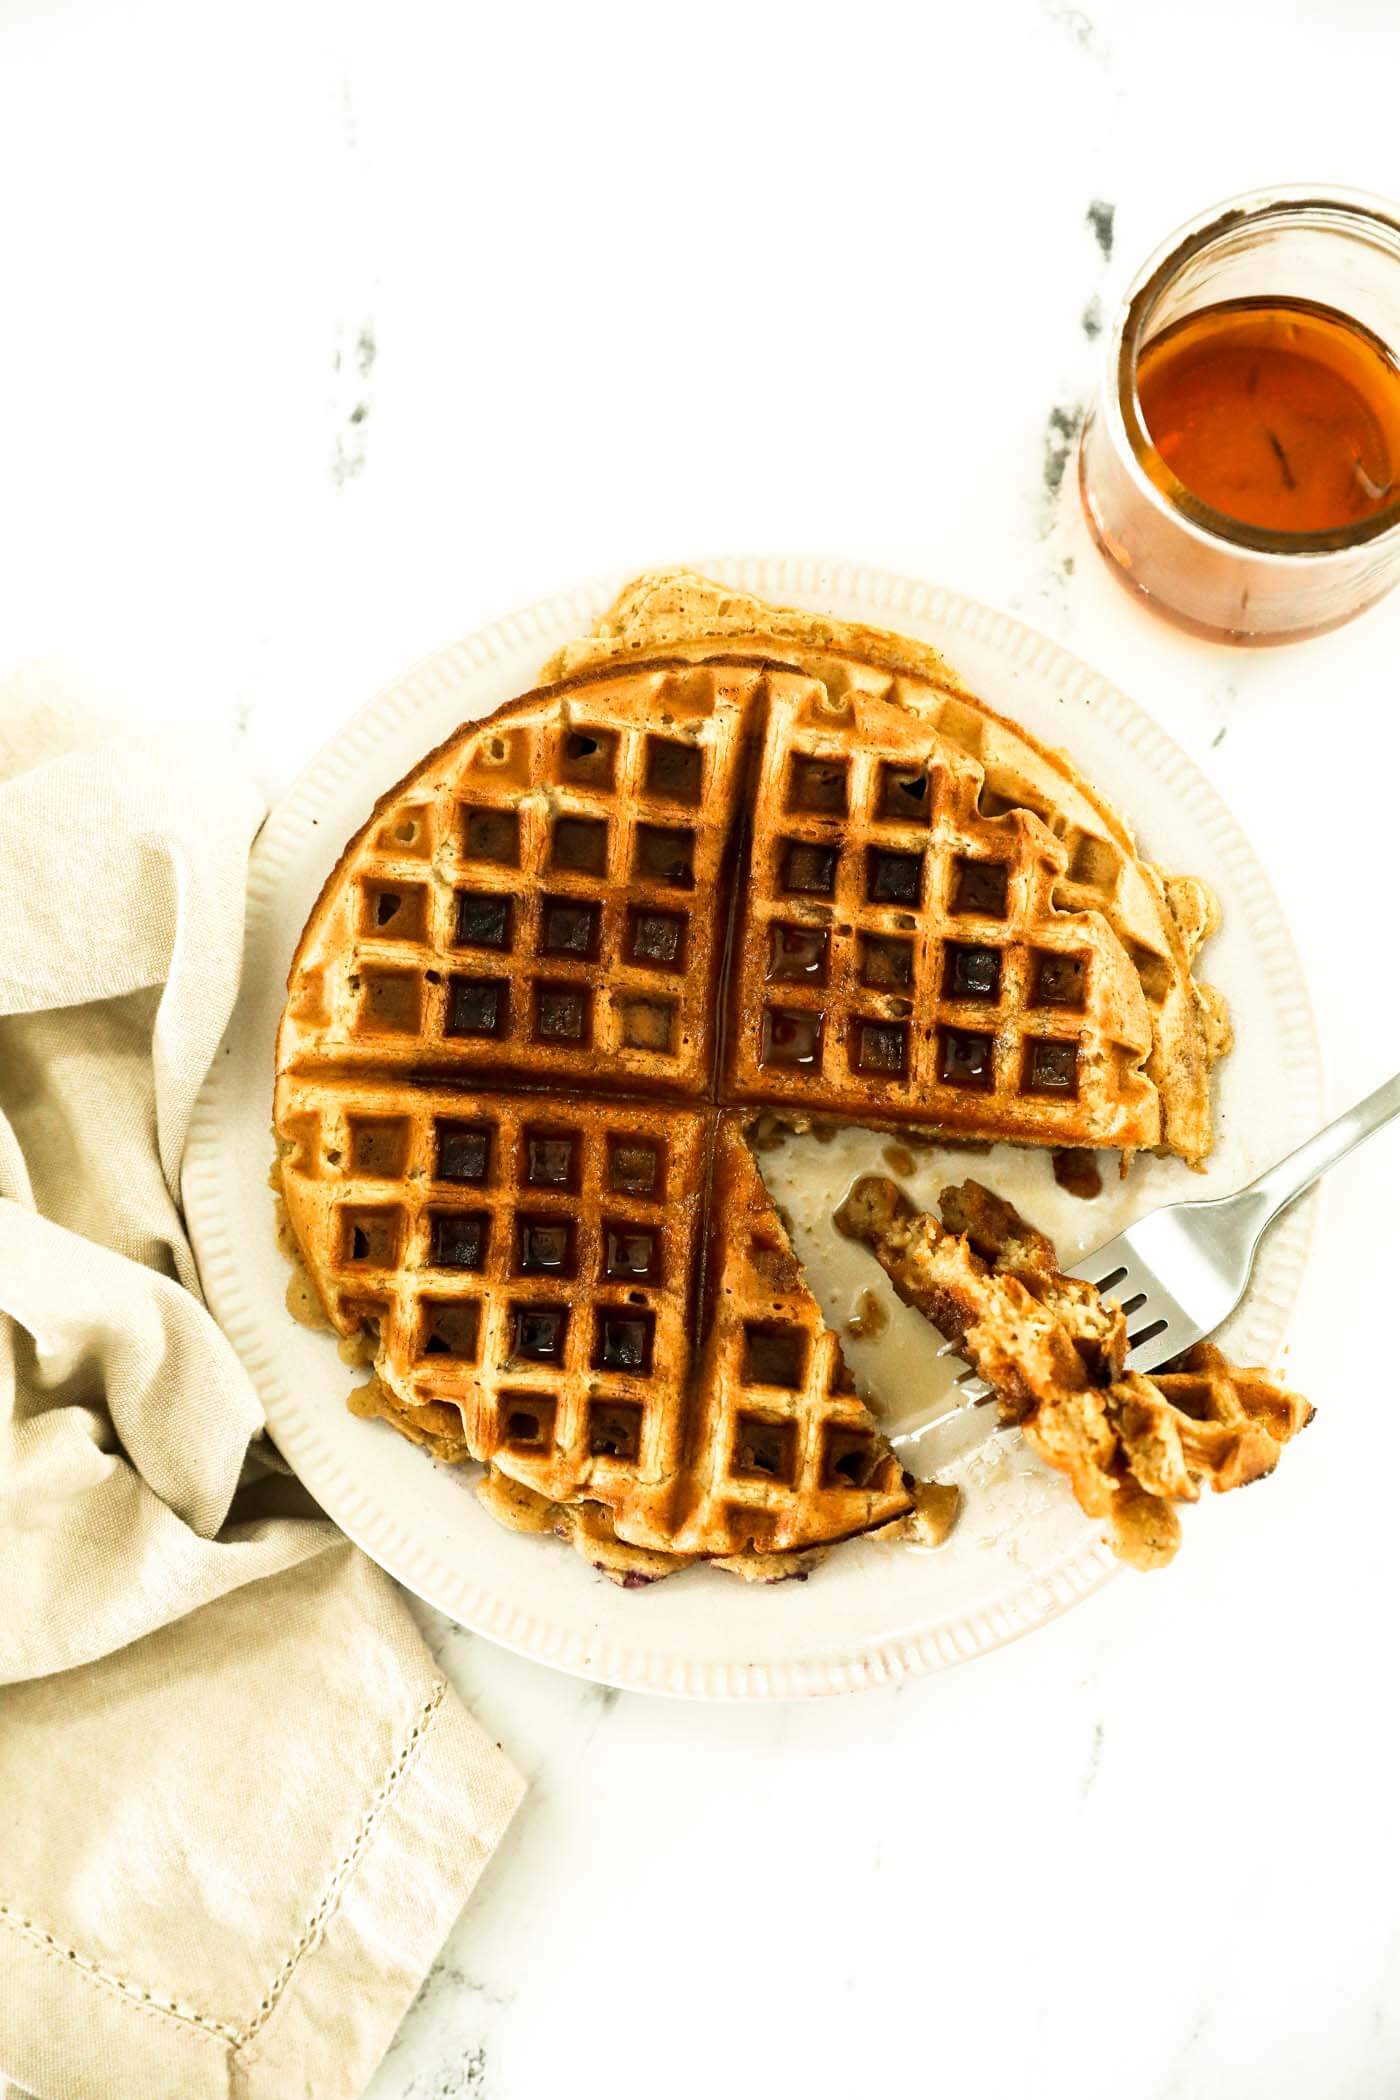 A plate with oat flour waffles. A triangle bite has been cut out and is on the fork next to the rest o the waffle. Maple syrup has been poured on top and more is on the side.